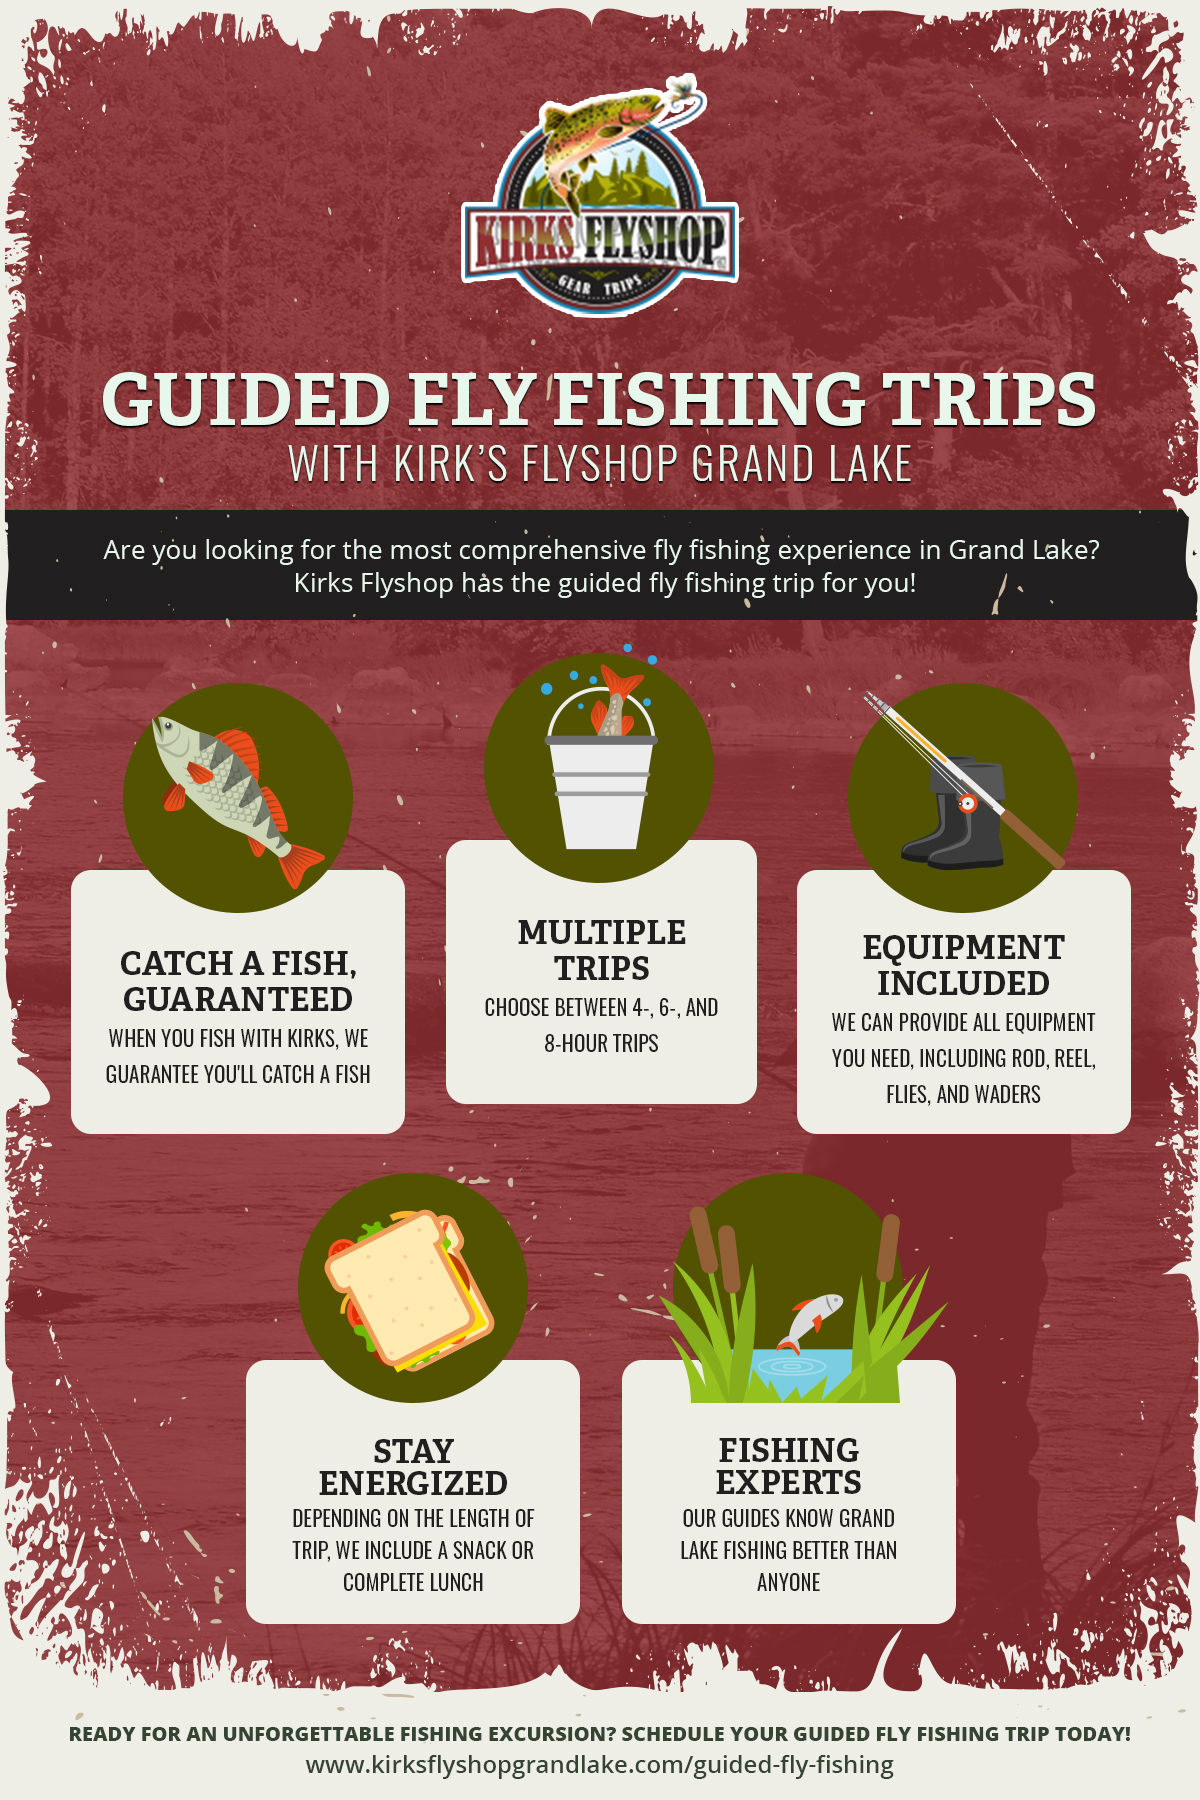 Diagram shows features of a fly fishing trip with Kirks Flyshop Grand Lake